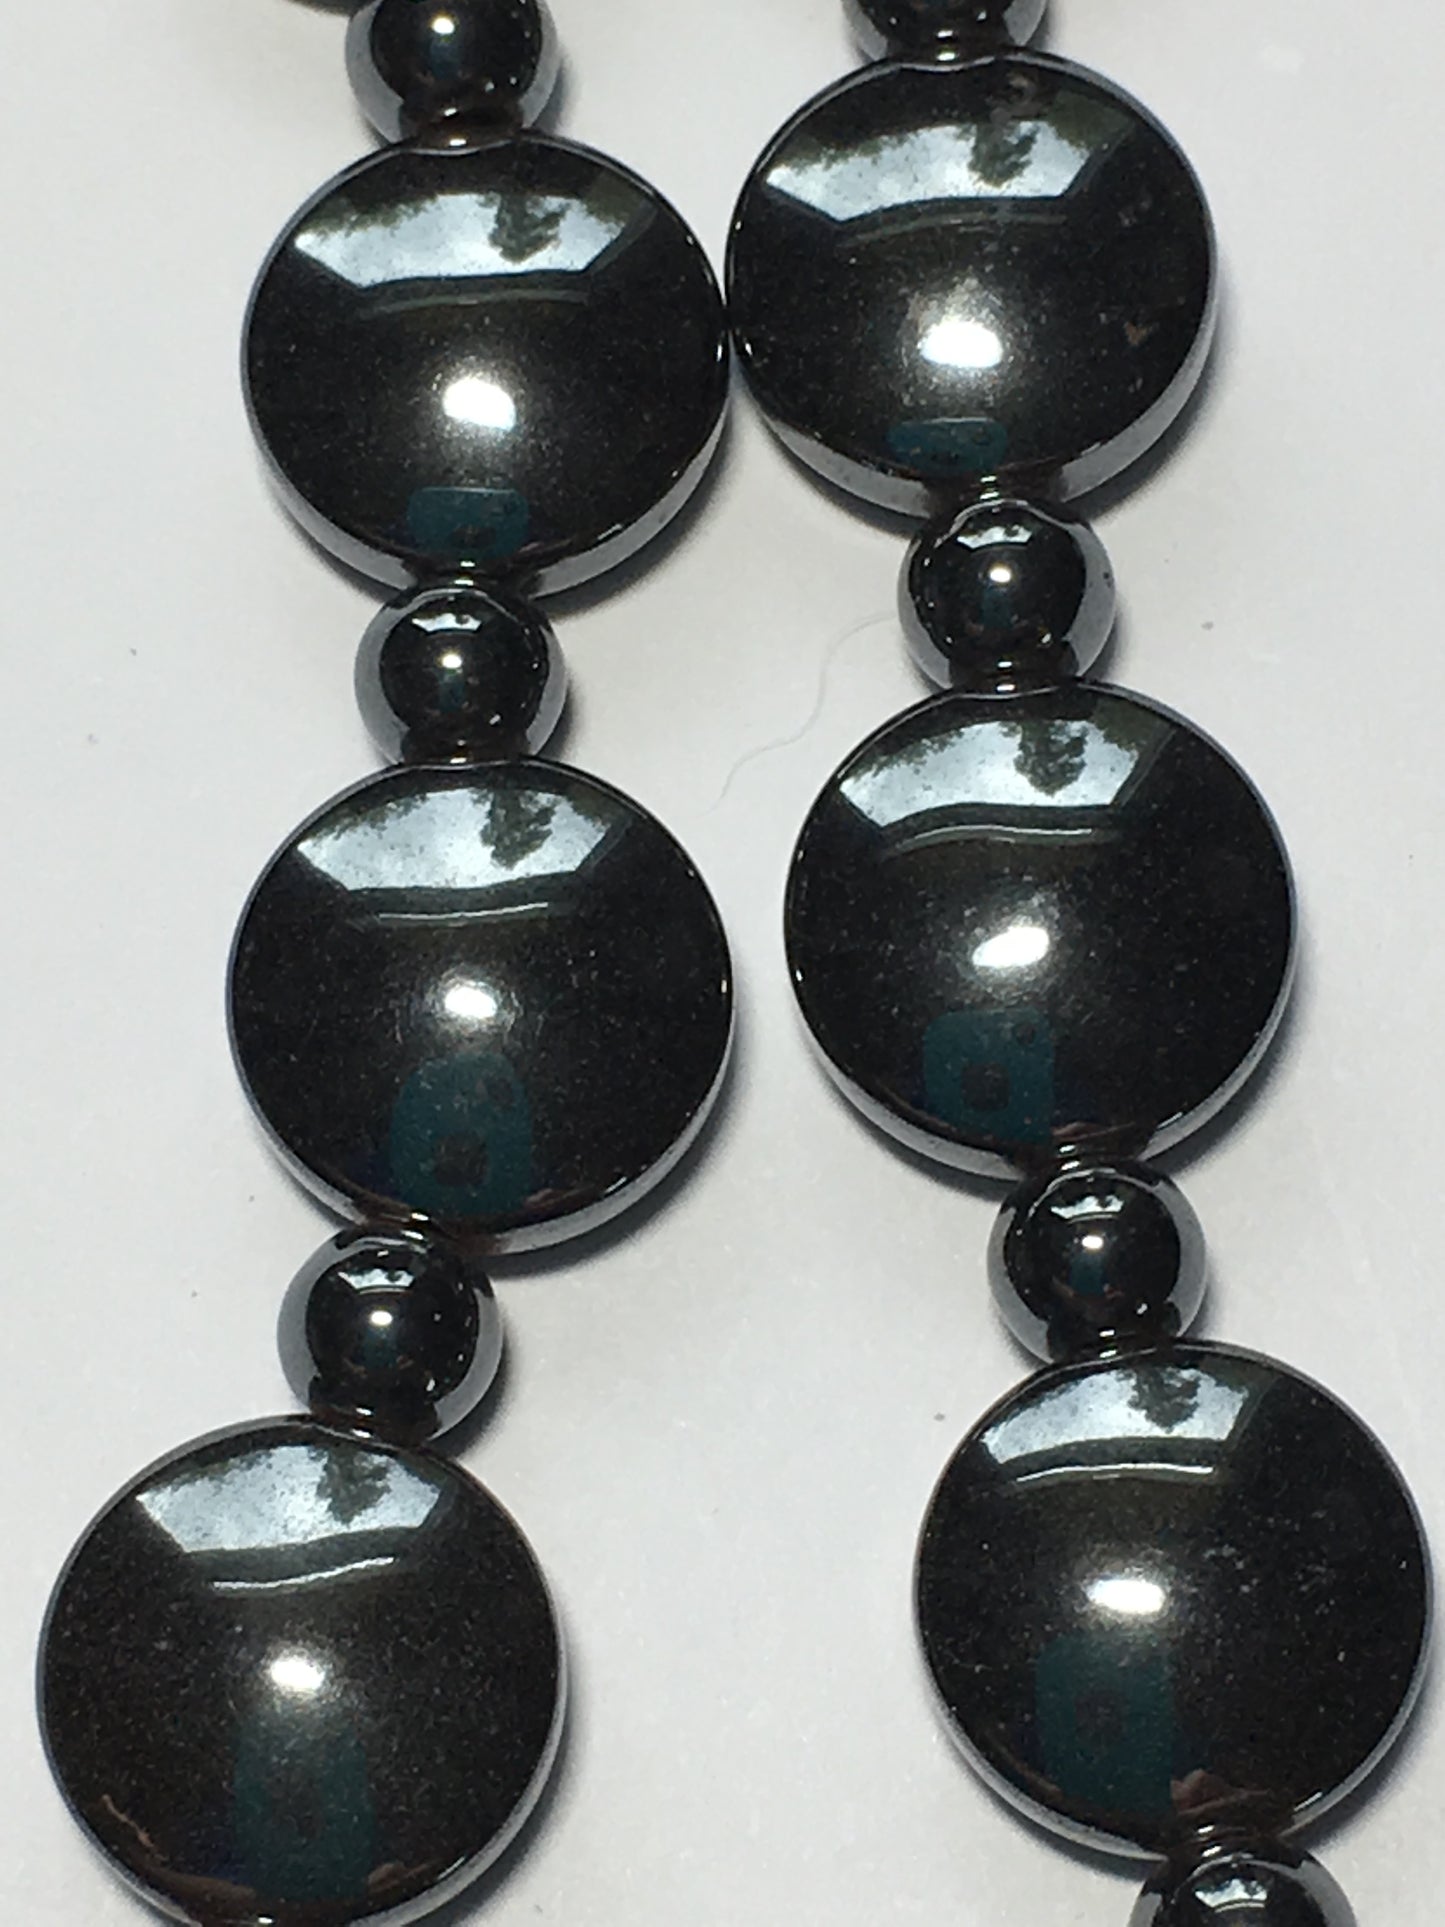 Bead Gallery Hematite Accent Beads Semi-Precious Stone, 10 mm Coin and 4 mm Rounds - 22 of Each